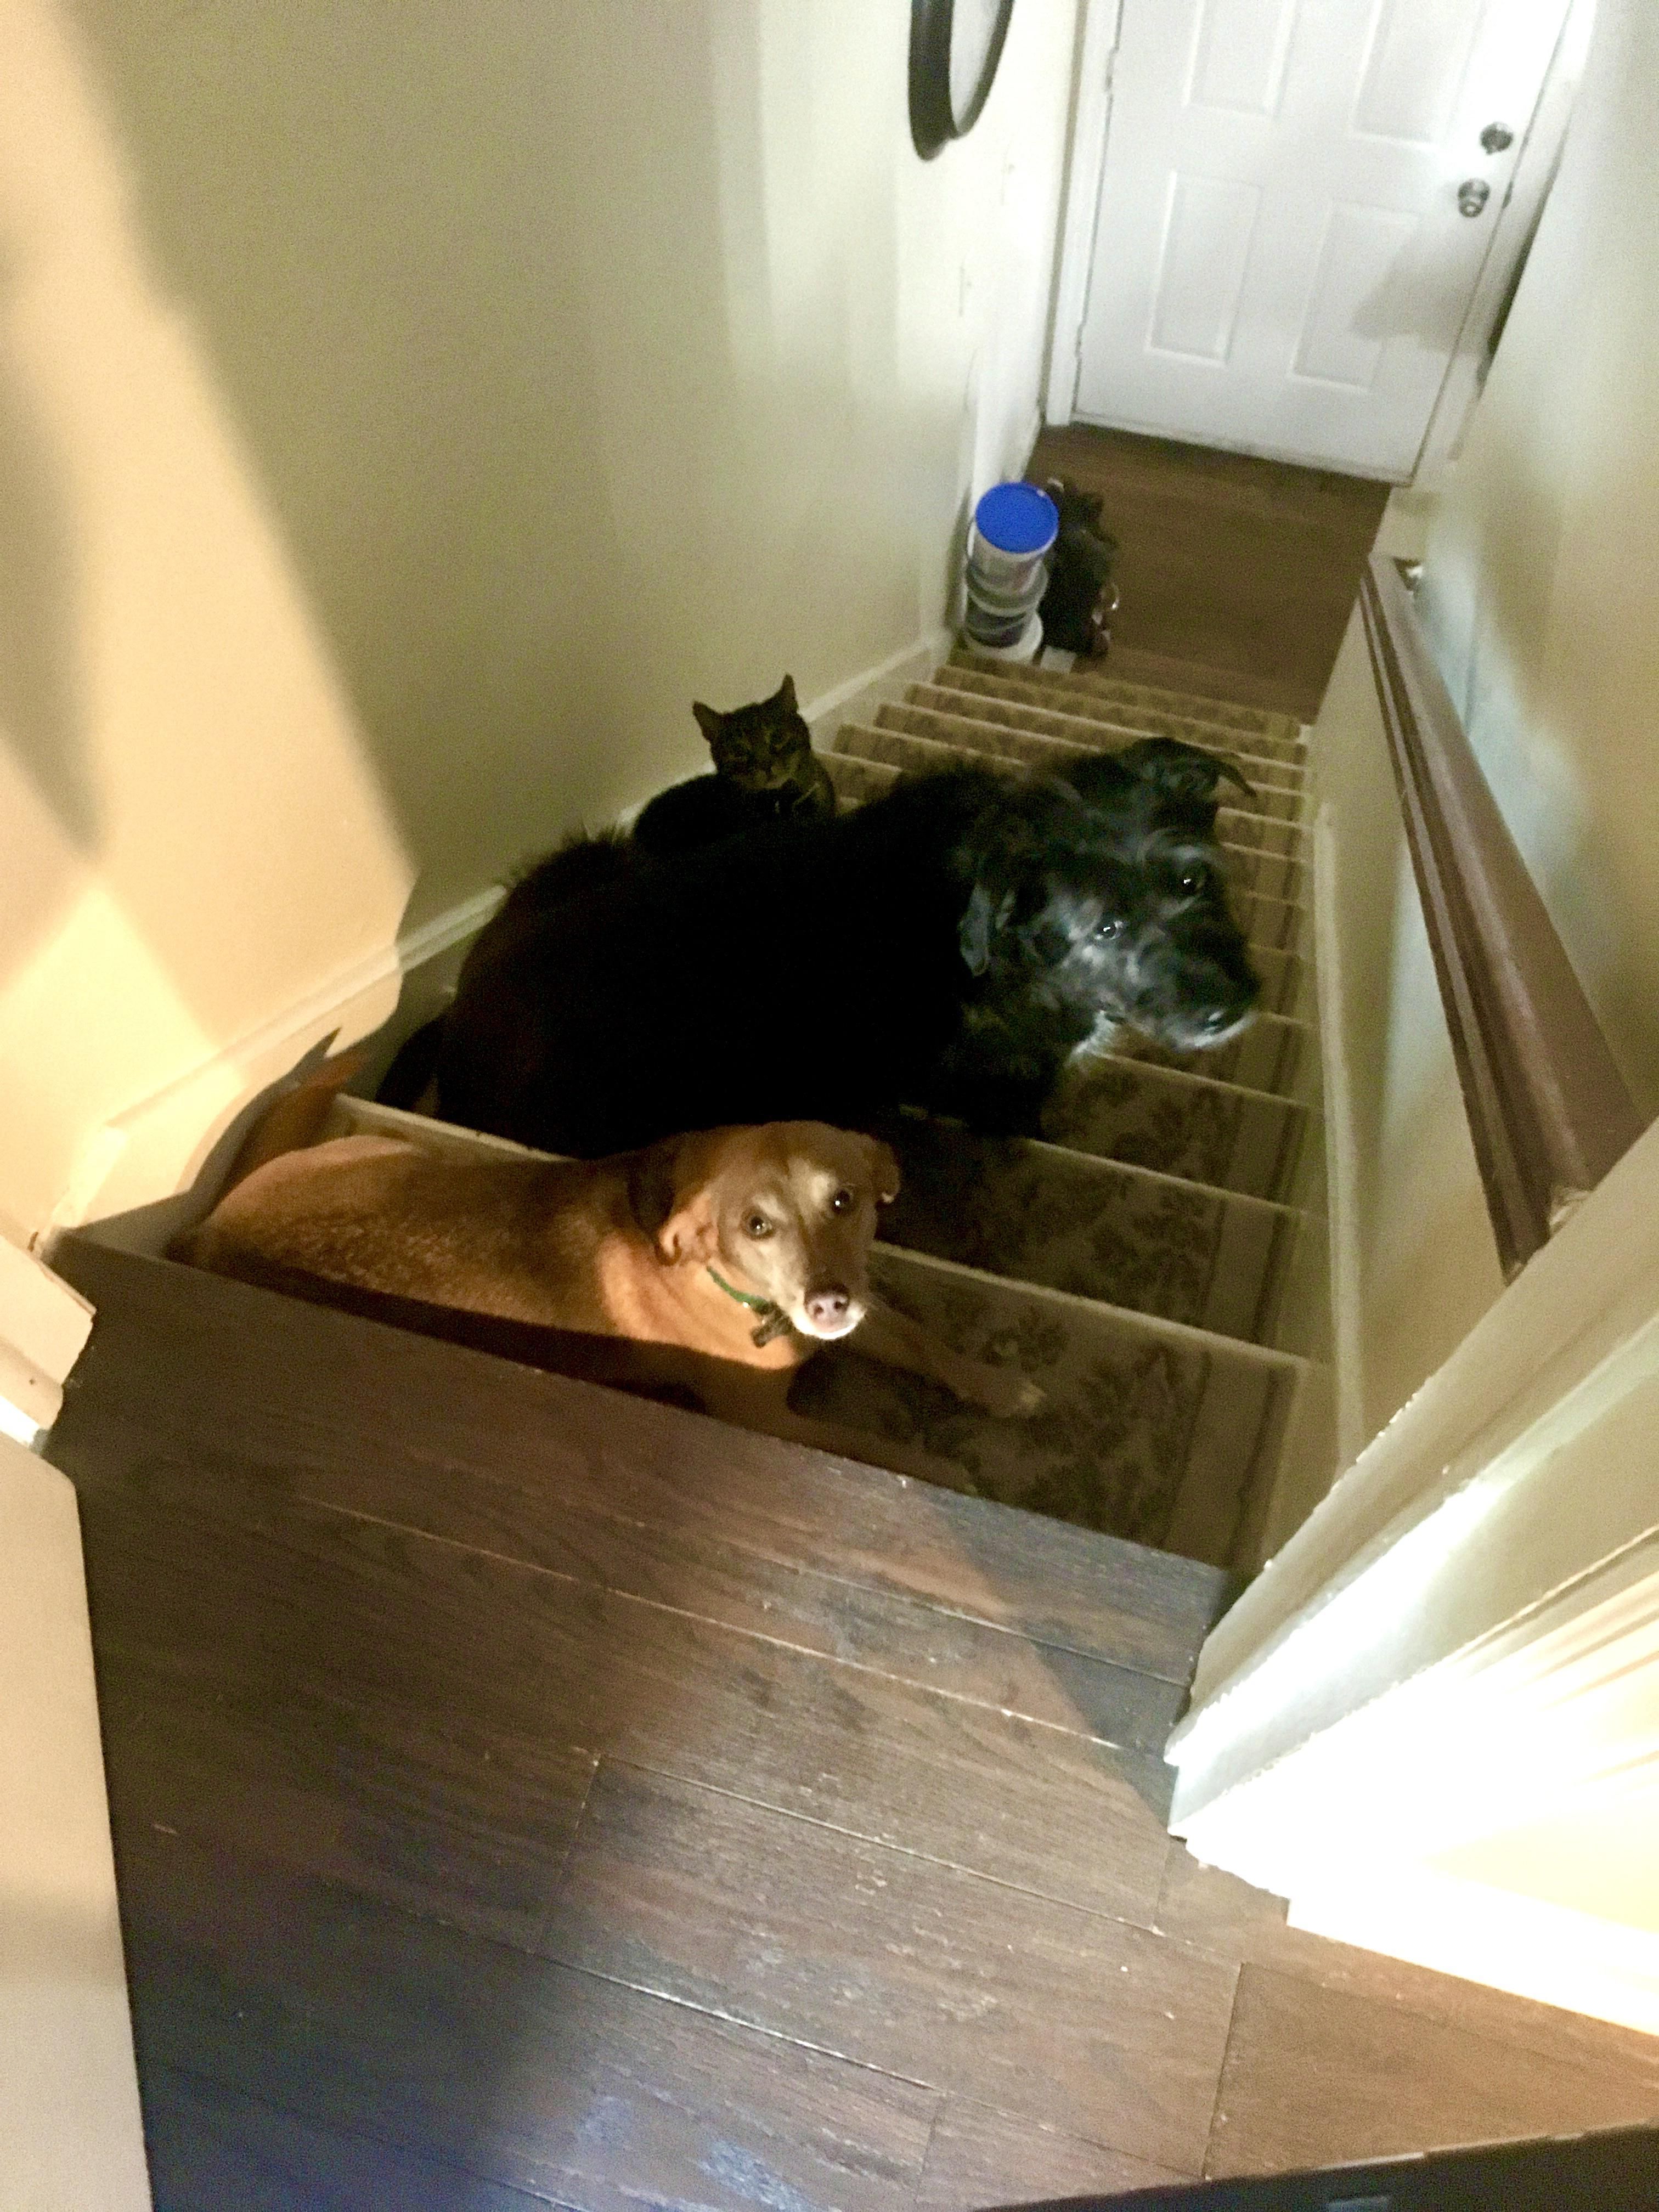 Apparently one of them turned on the new Roomba while I was sleeping upstairs. I opened the door to see this crew all hiding from the noise.